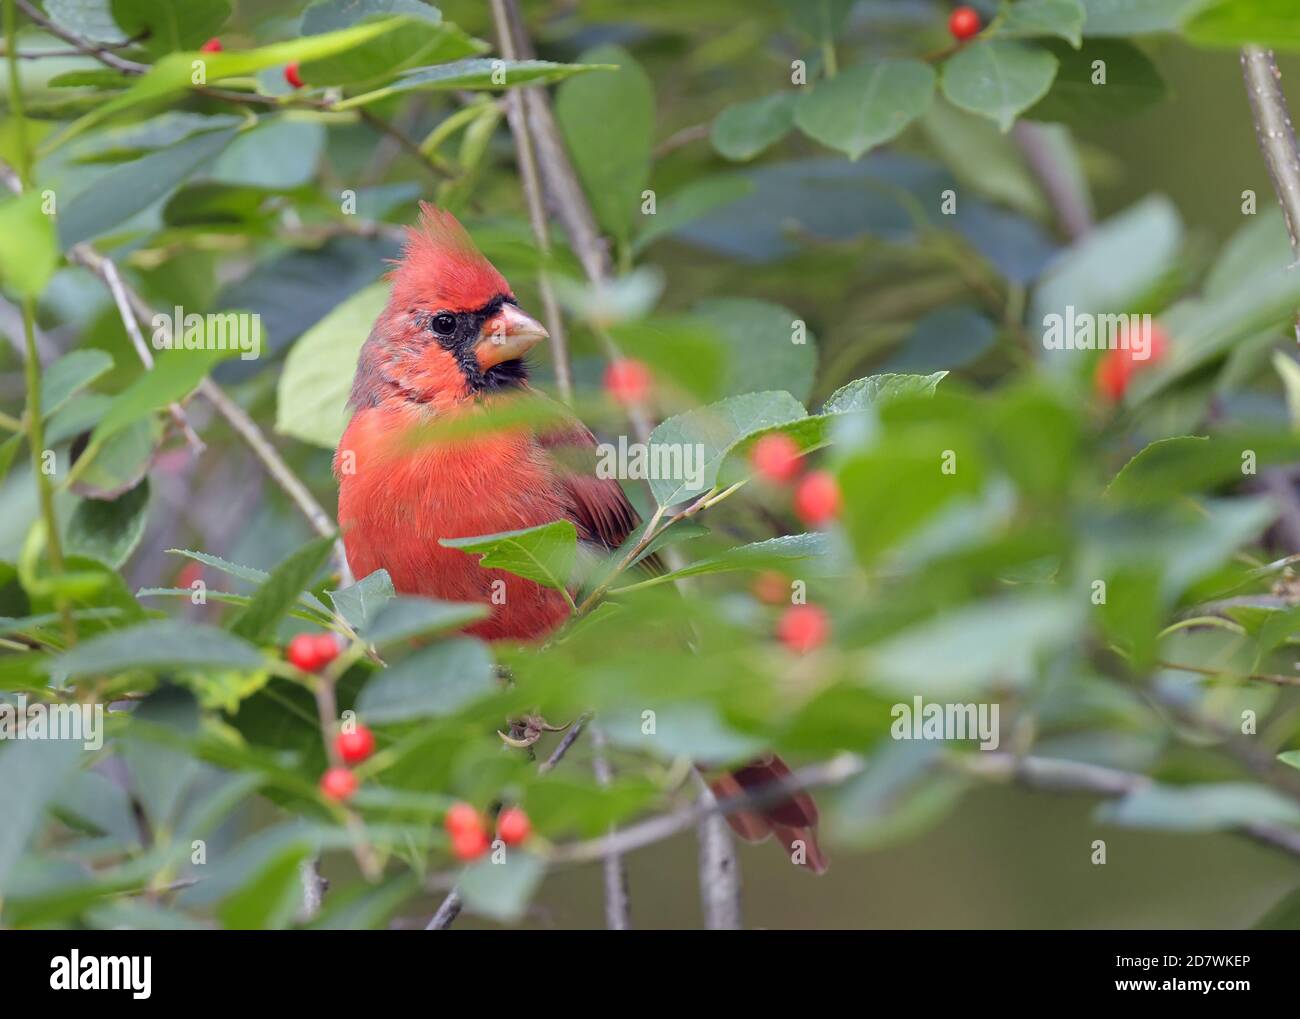 Male Northern Cardinal bird perched on a branch with red berries Stock Photo